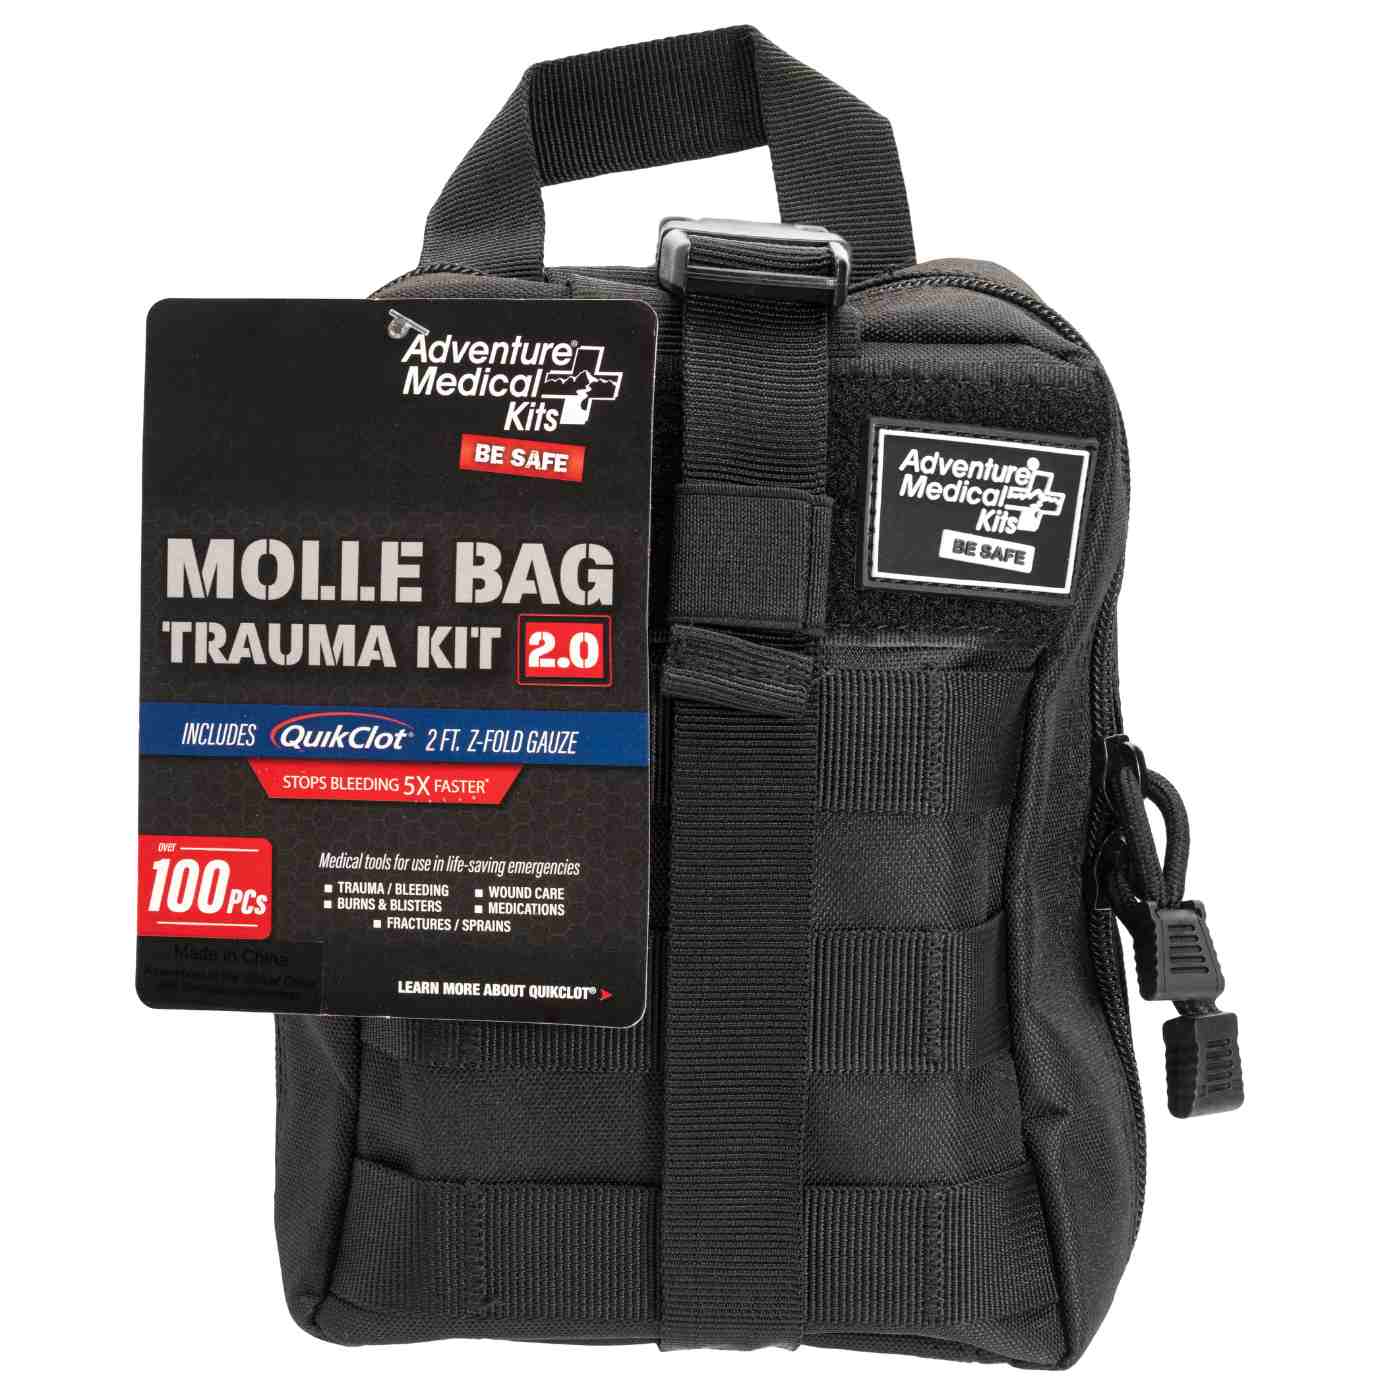 MOLLE Bag Trauma Kit 2.0 - Black front in packaging